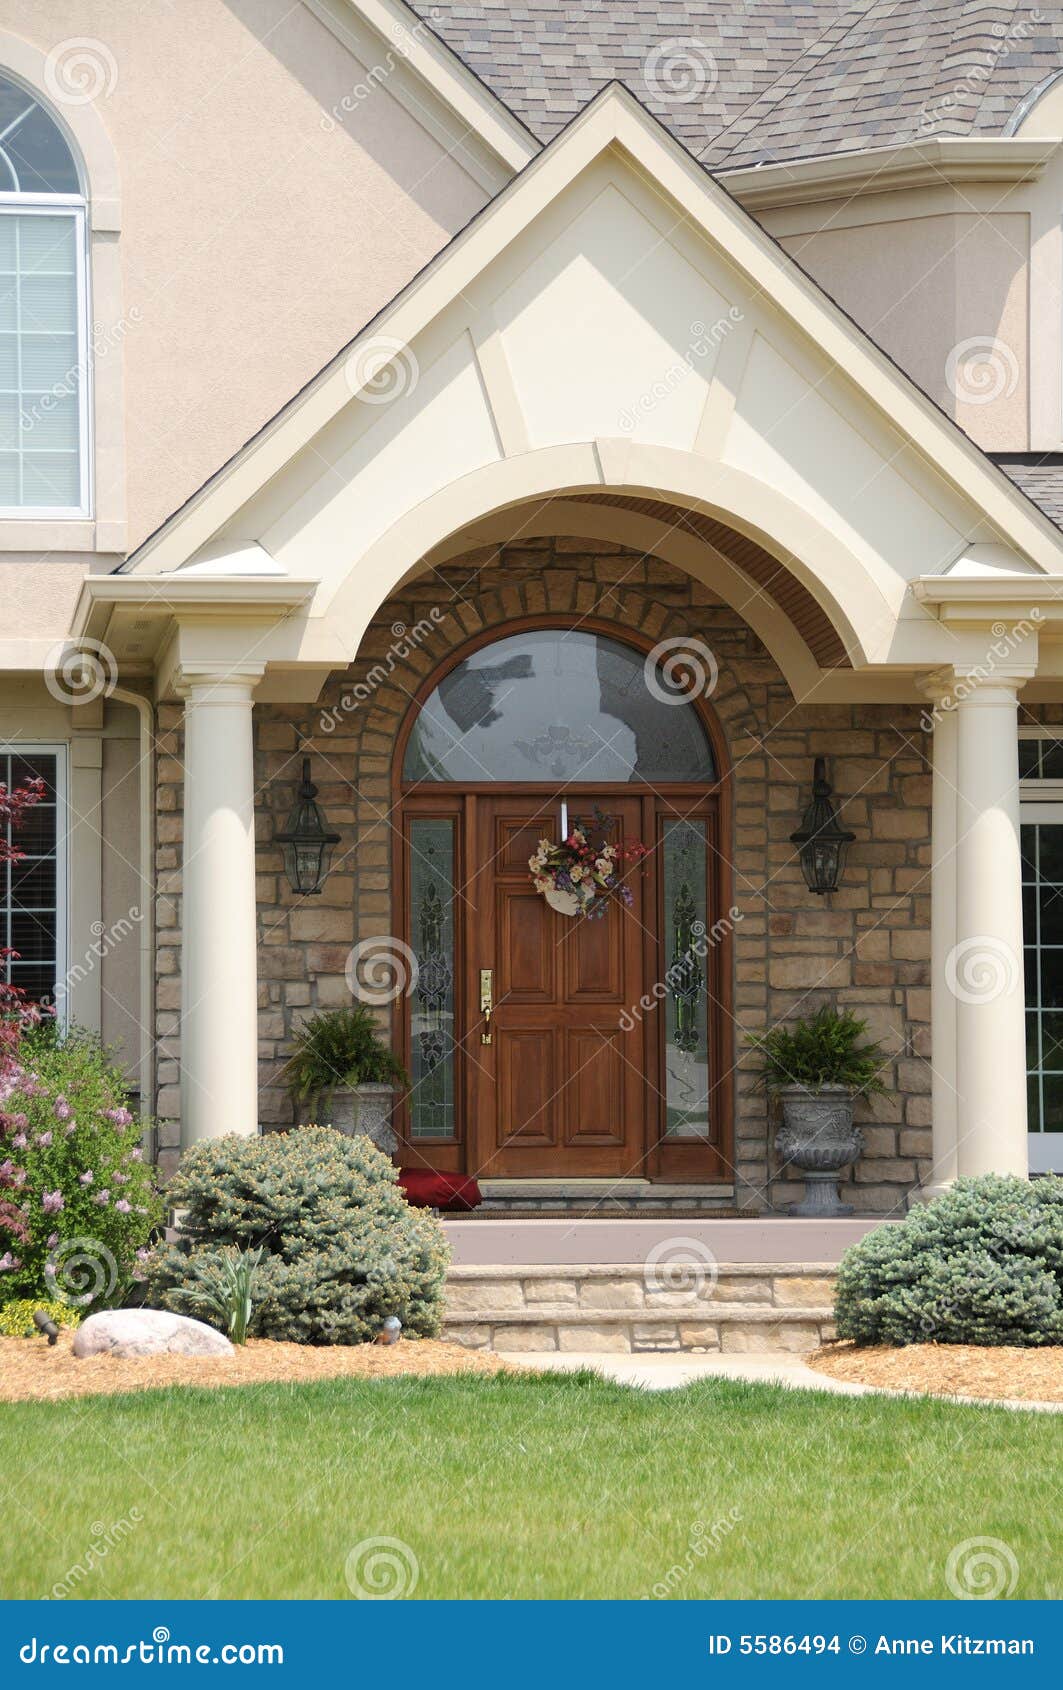 Exterior View Of The Open Front Door To A Residence With The